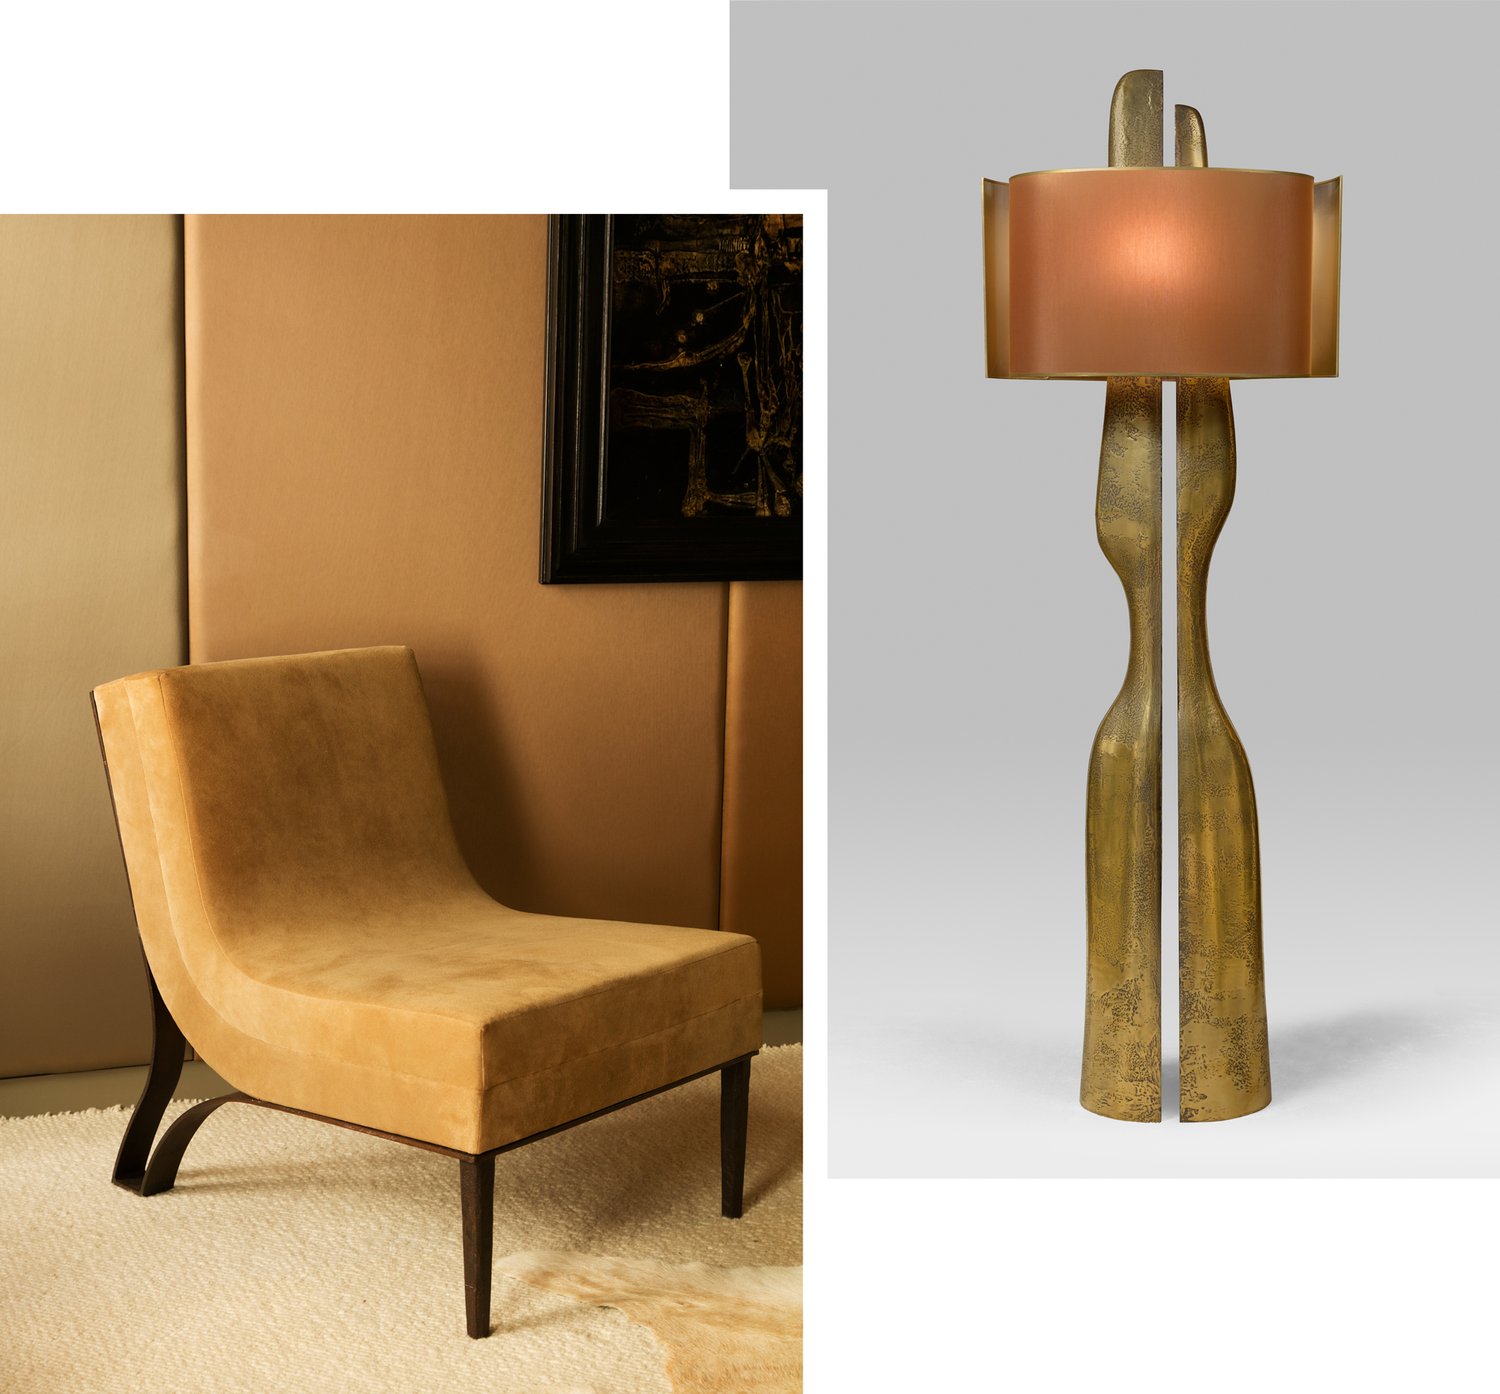 Sculptured upholstered chair on left and floor lamp with two adjoining bases and multi-layered shade.